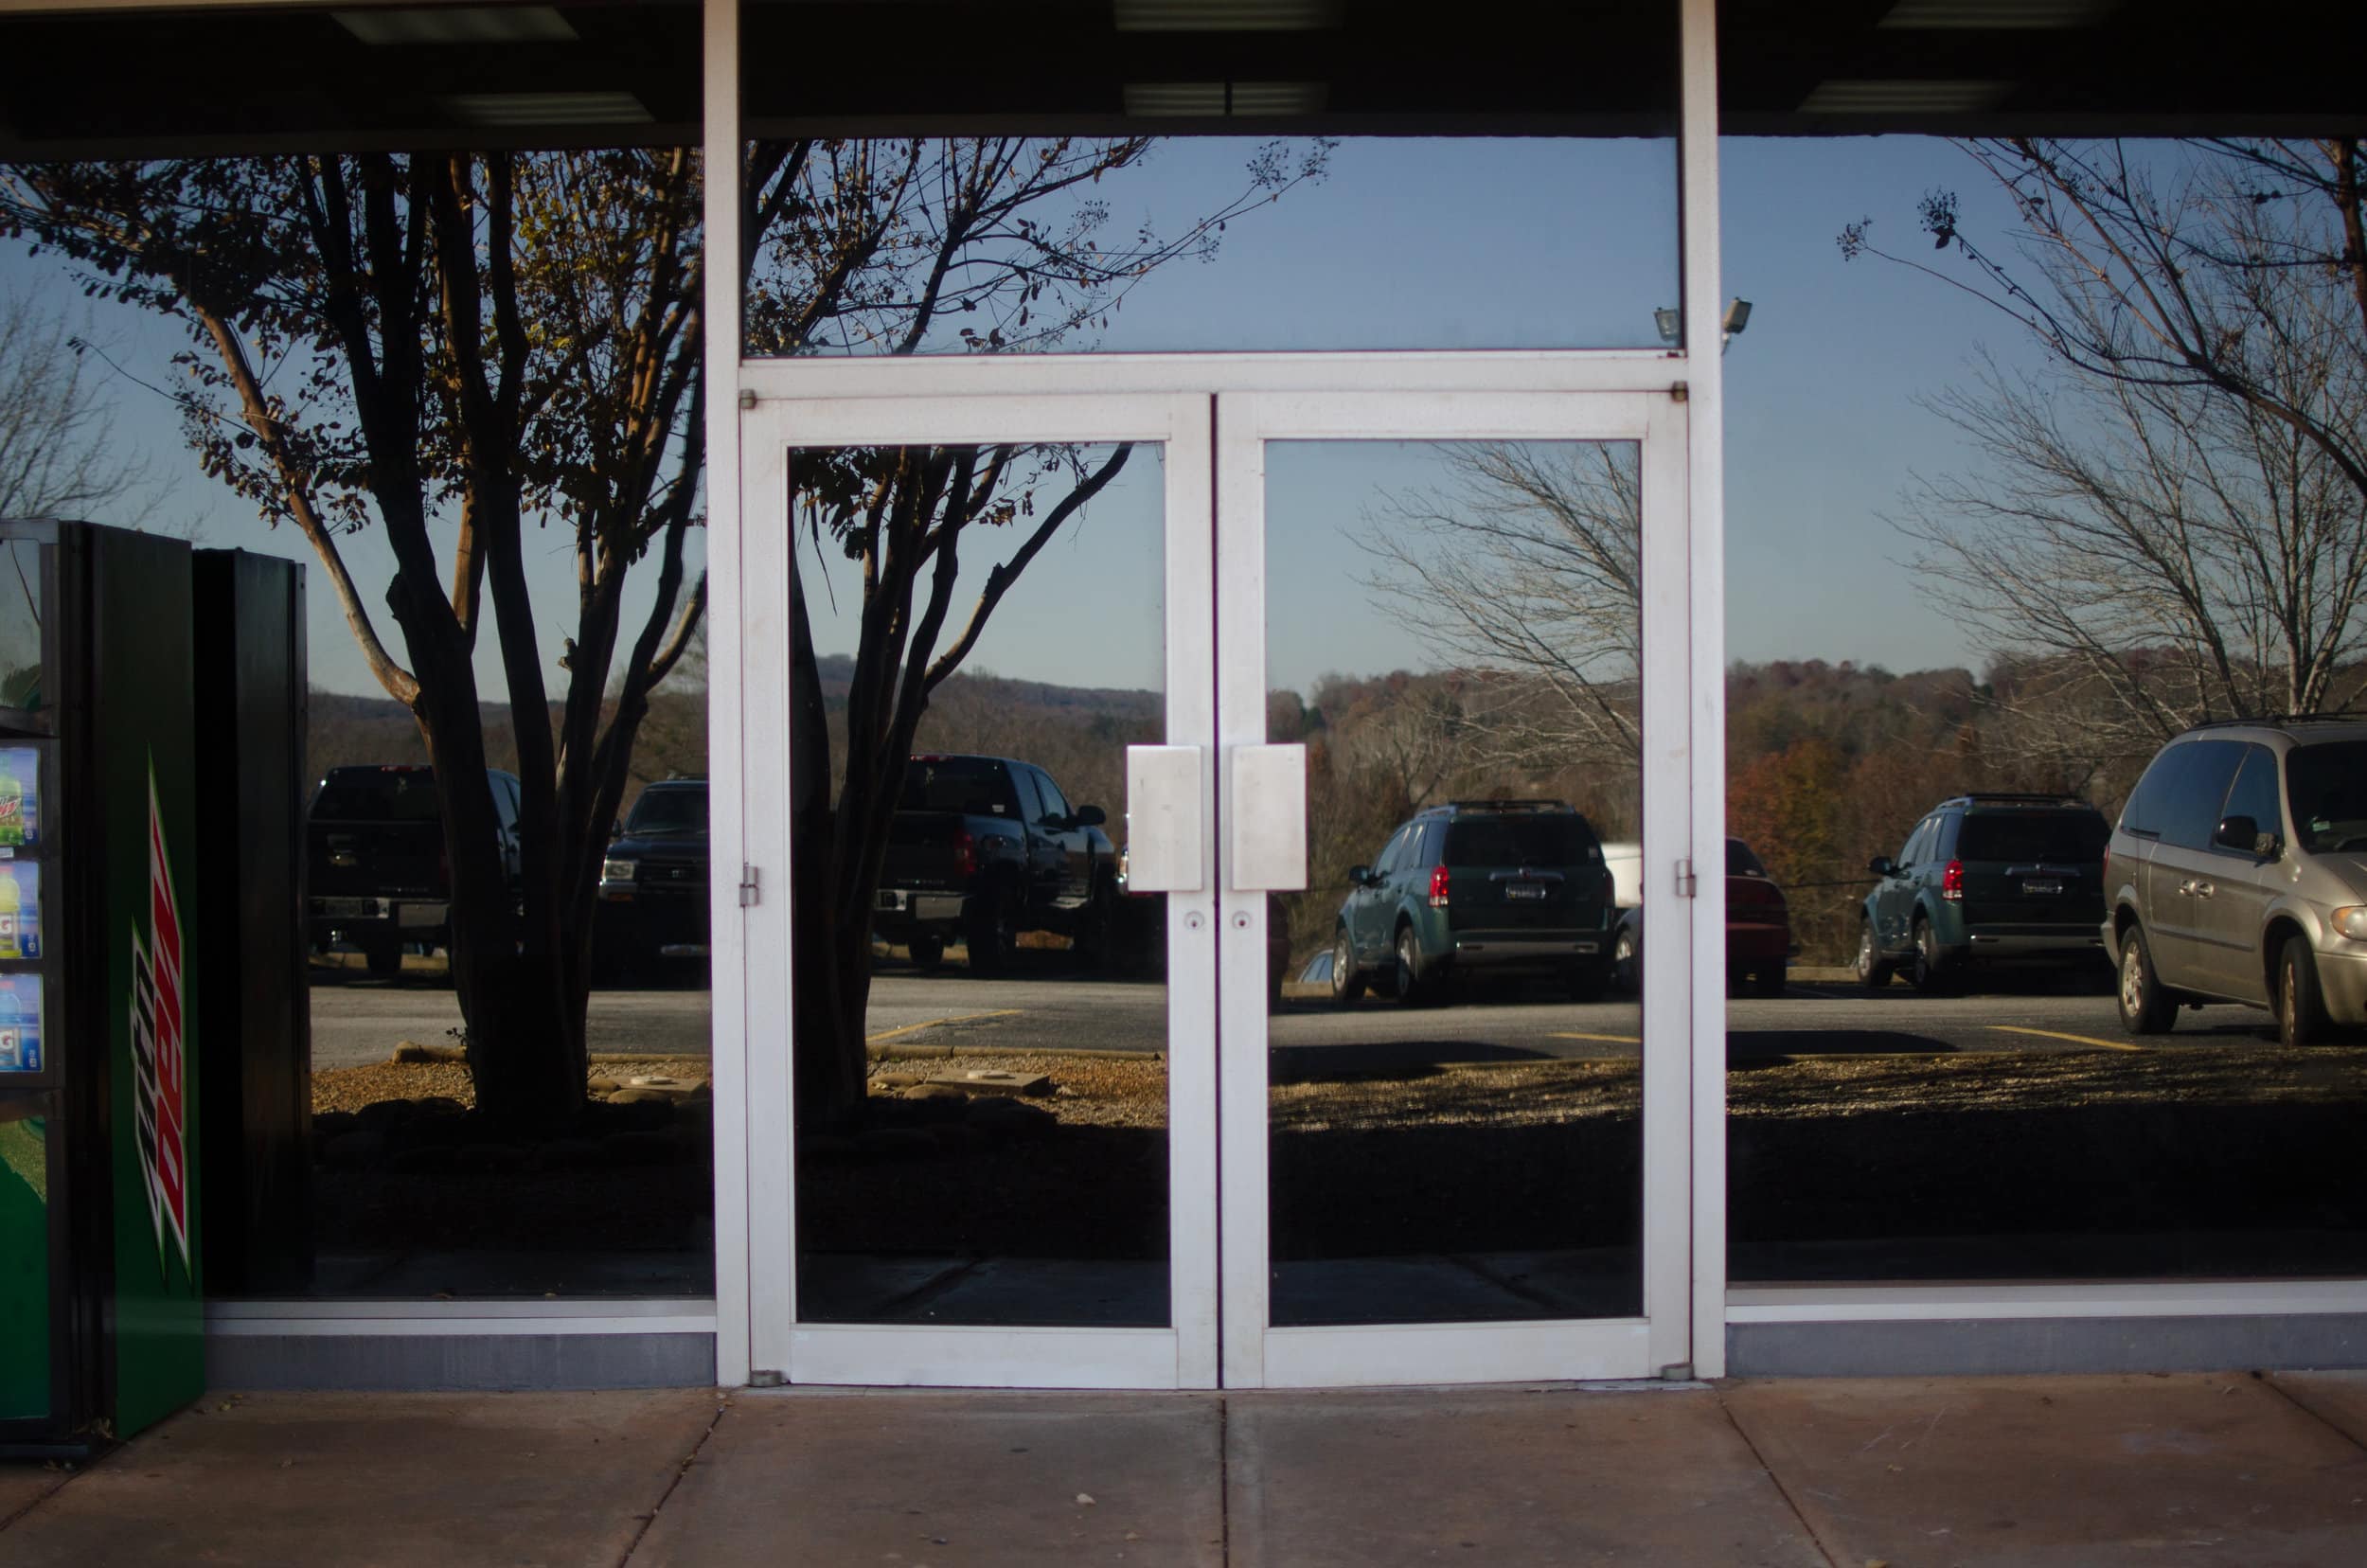 The Brisse Suite contains the language lab and a few classrooms. The entrance to this is outside behind the library. Follow the pathway through the parking lot and behind the library you will see two double doors.